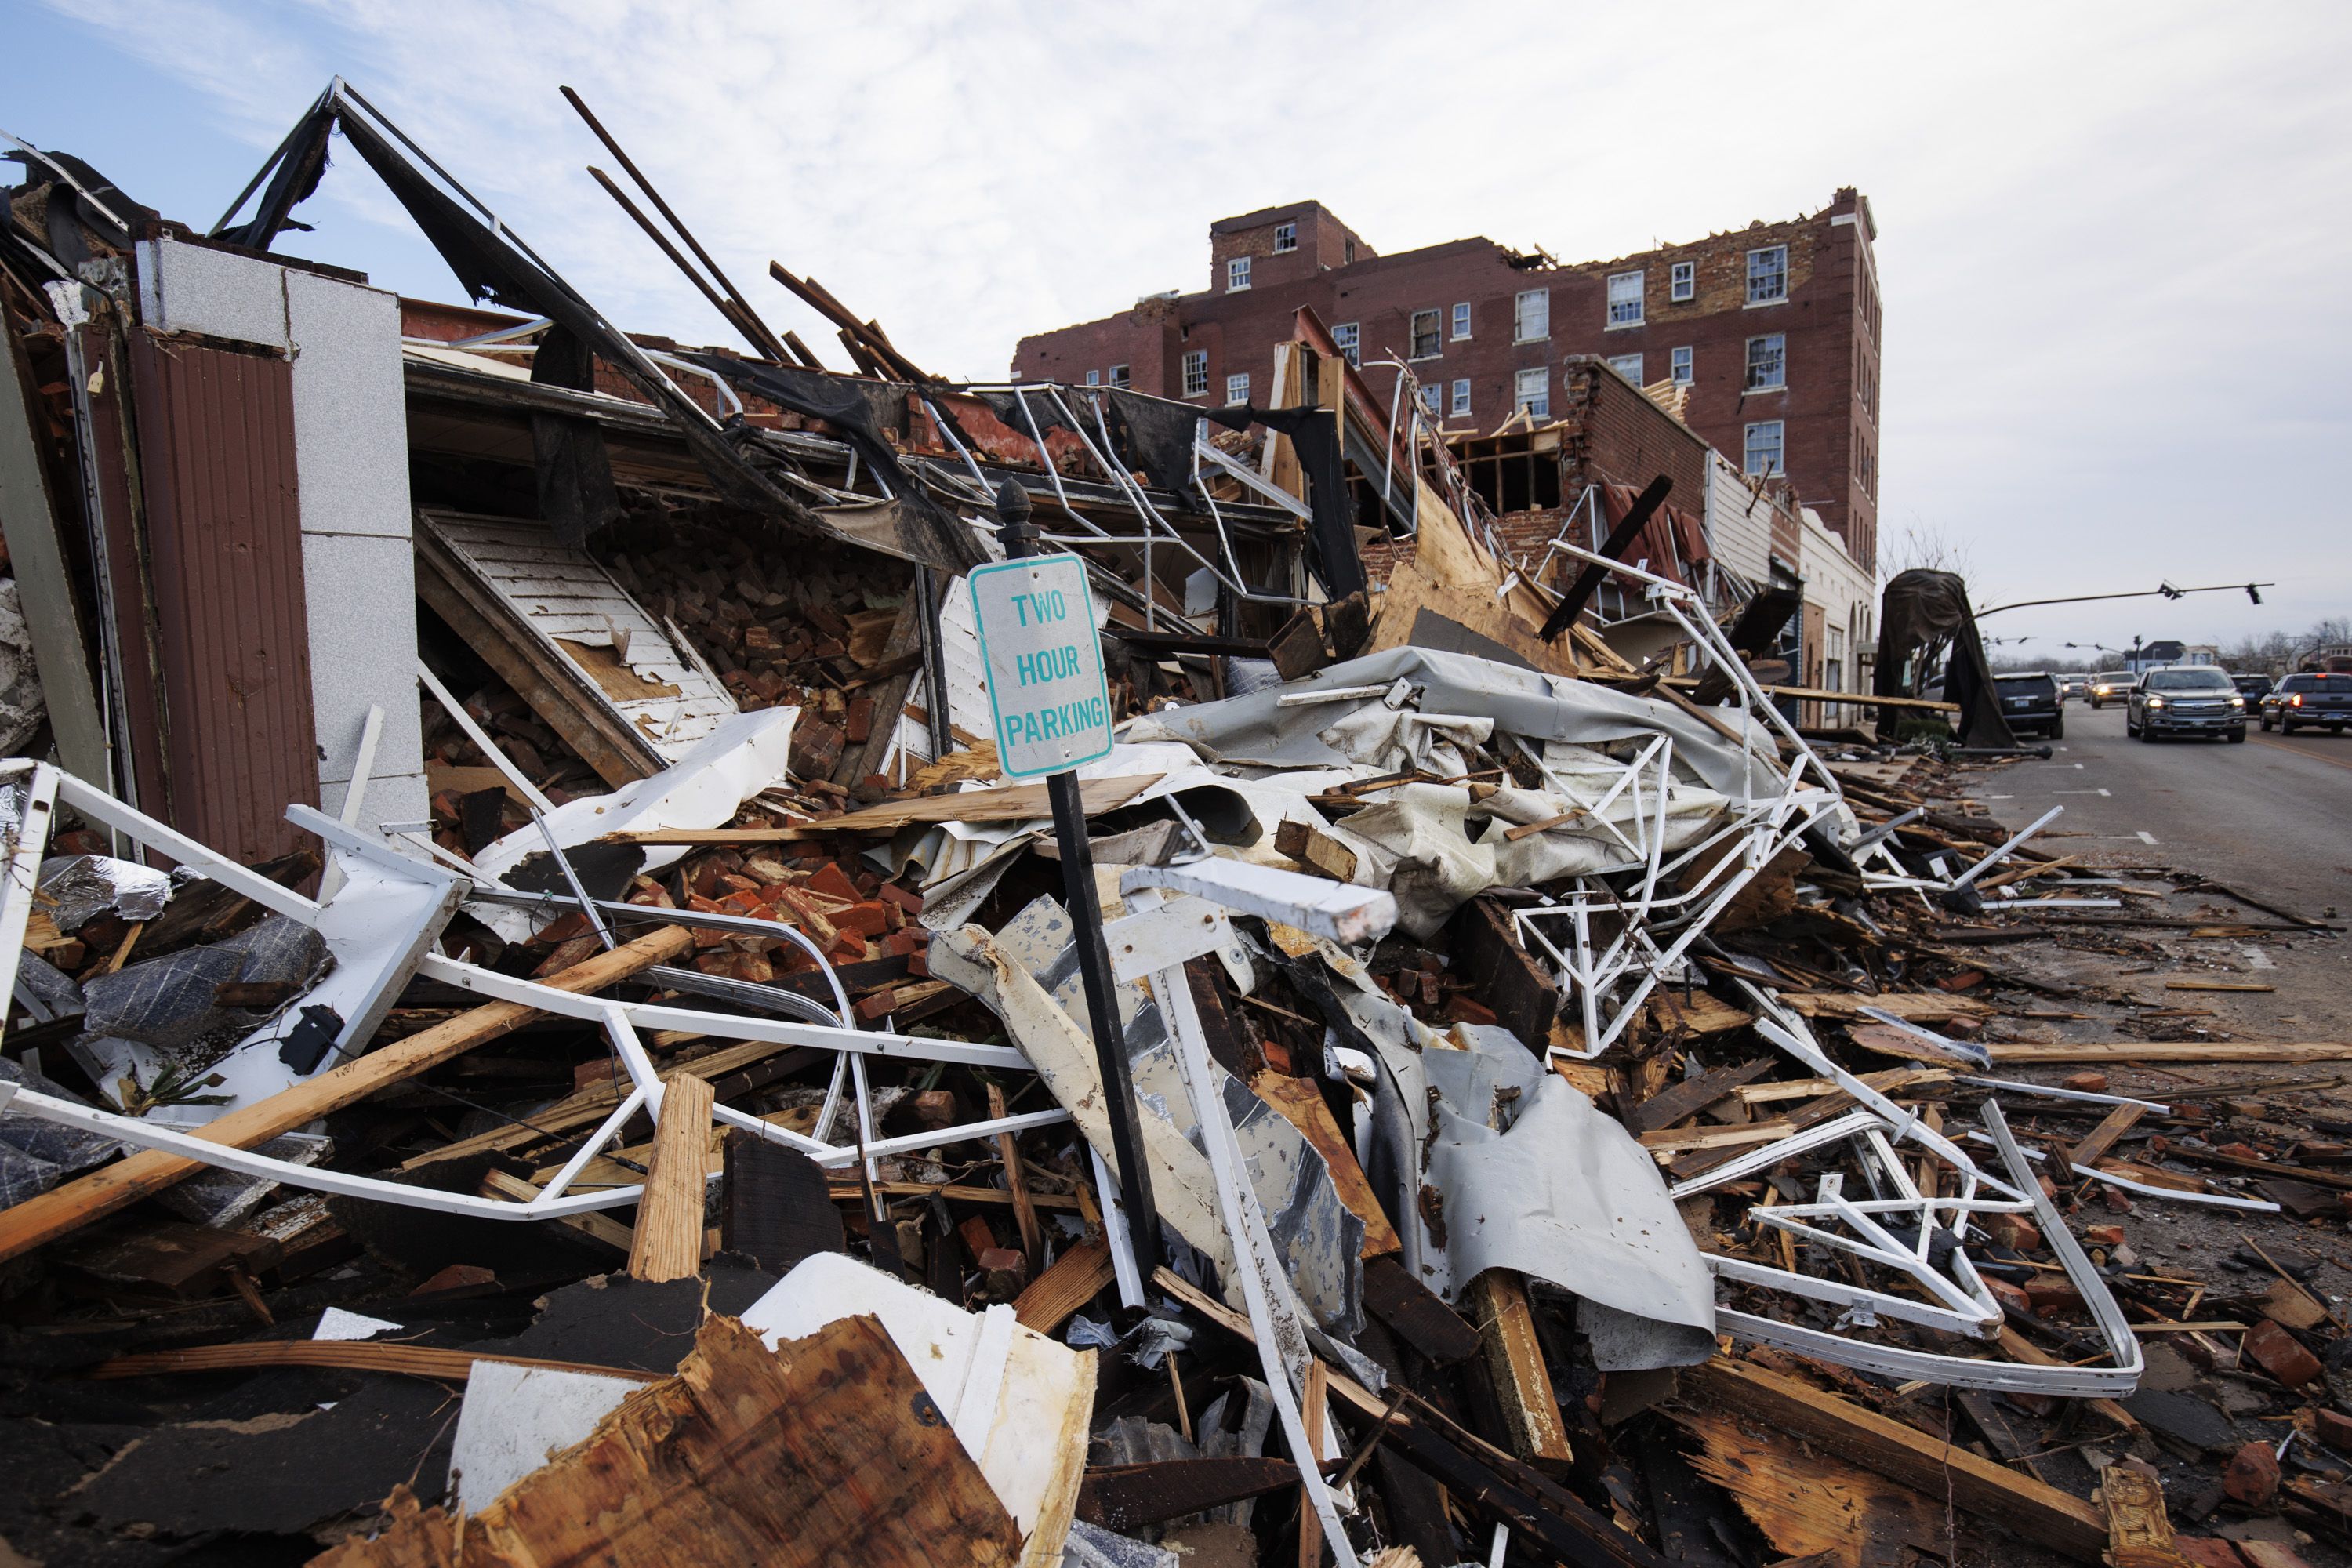 eavy damage is seen downtown after a tornado swept through the area on December 11, 2021 in Mayfield, Kentucky.